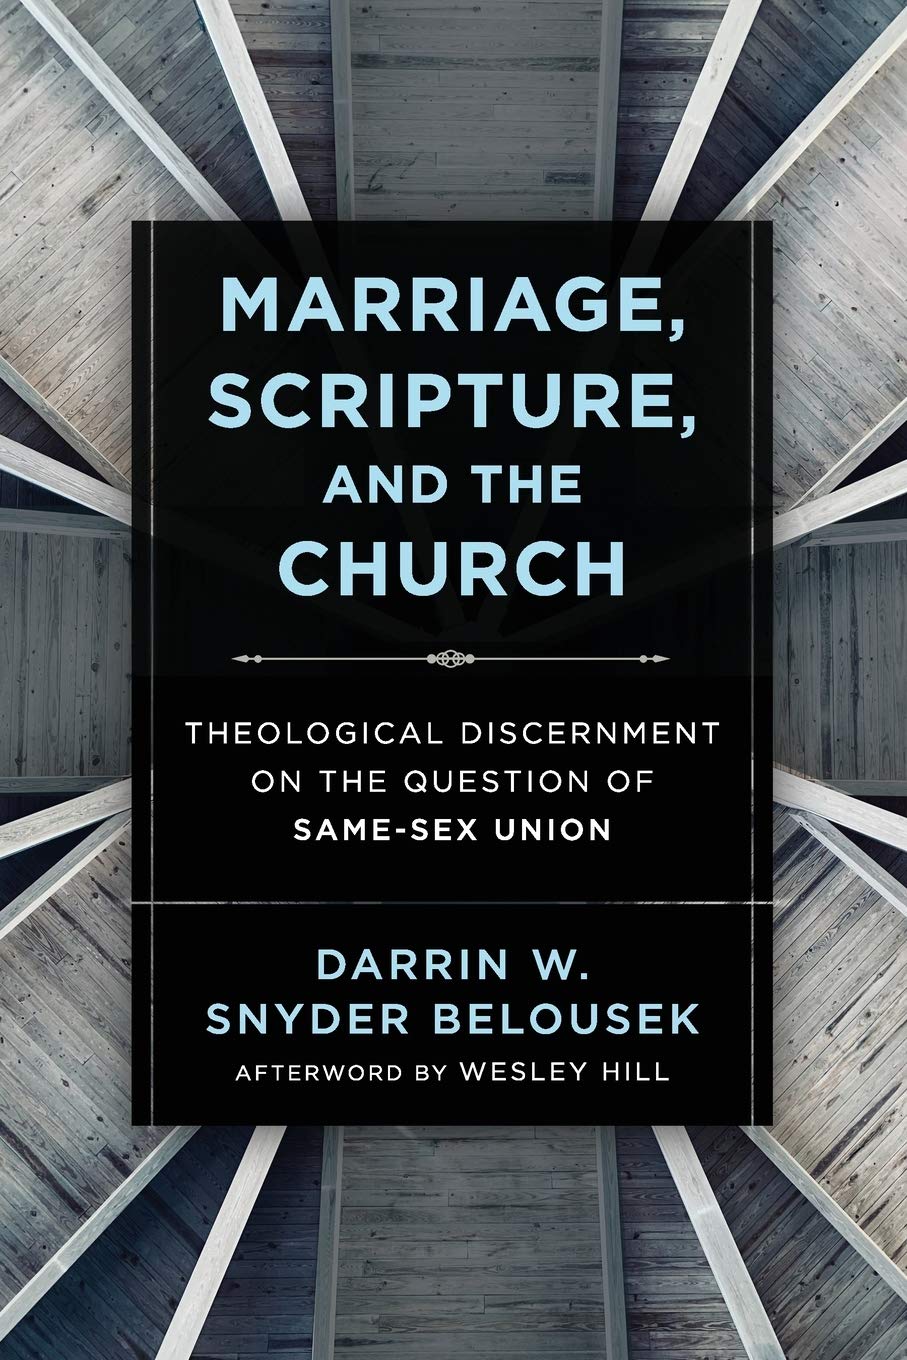 Marriage, Scripture, and the Church Theological Discernment on the Question of Same-Sex Union (Book Review)